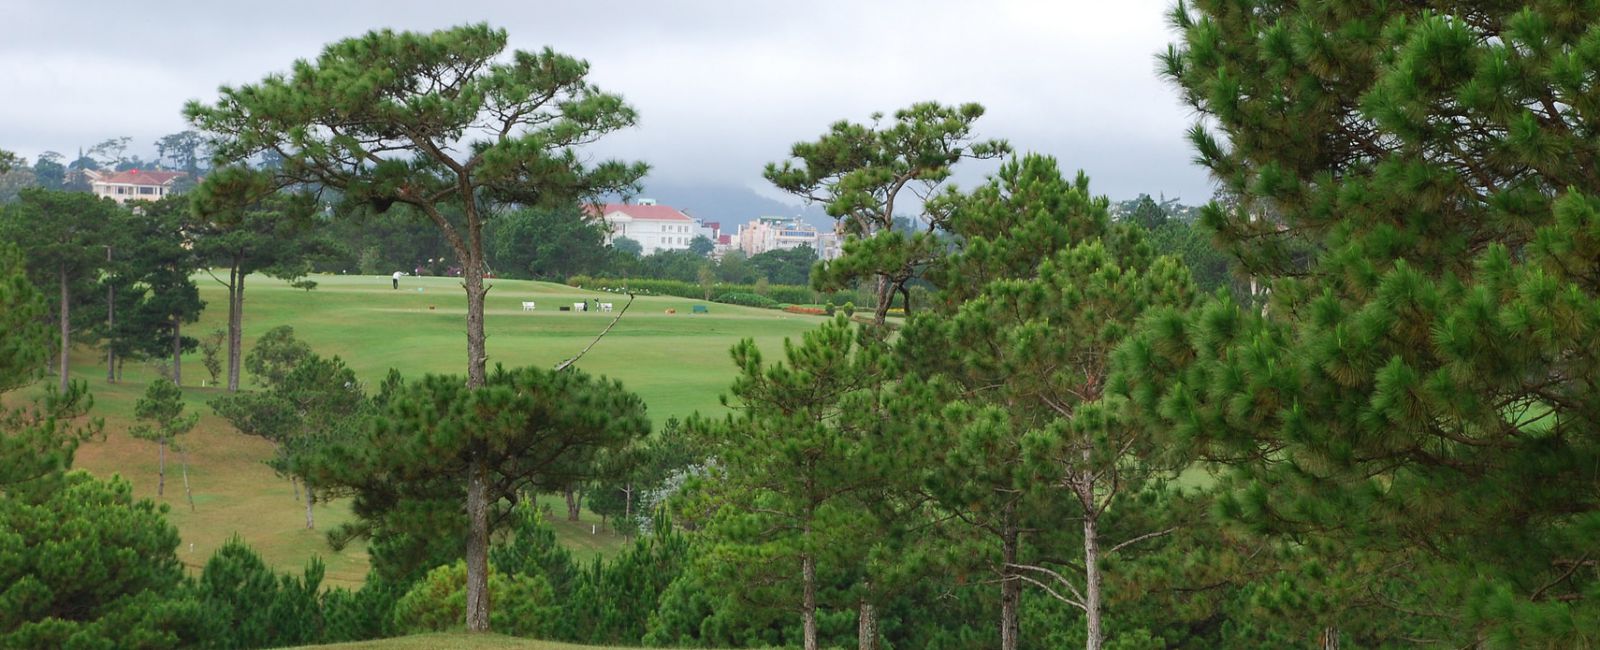 5 Day Golf Dalat and Stay at Palace Heritage Luxury Hotel